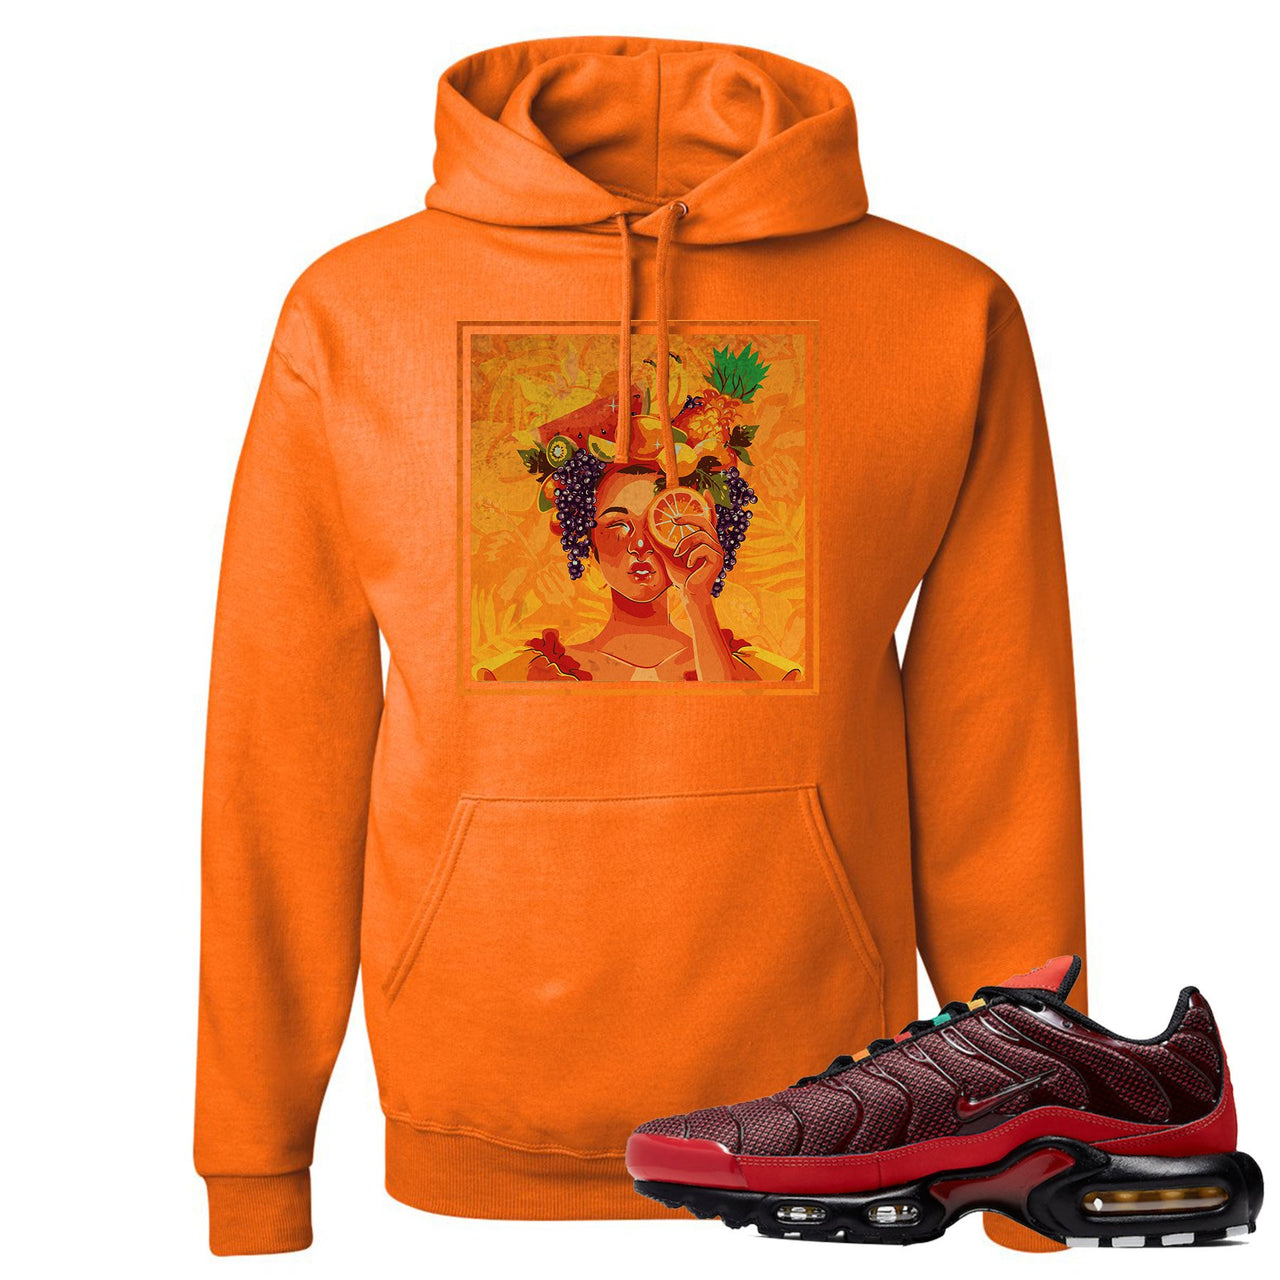 Printed on the front of the air max plus sunburst sneaker matching safety orange pullover hoodie is the lady fruit logo